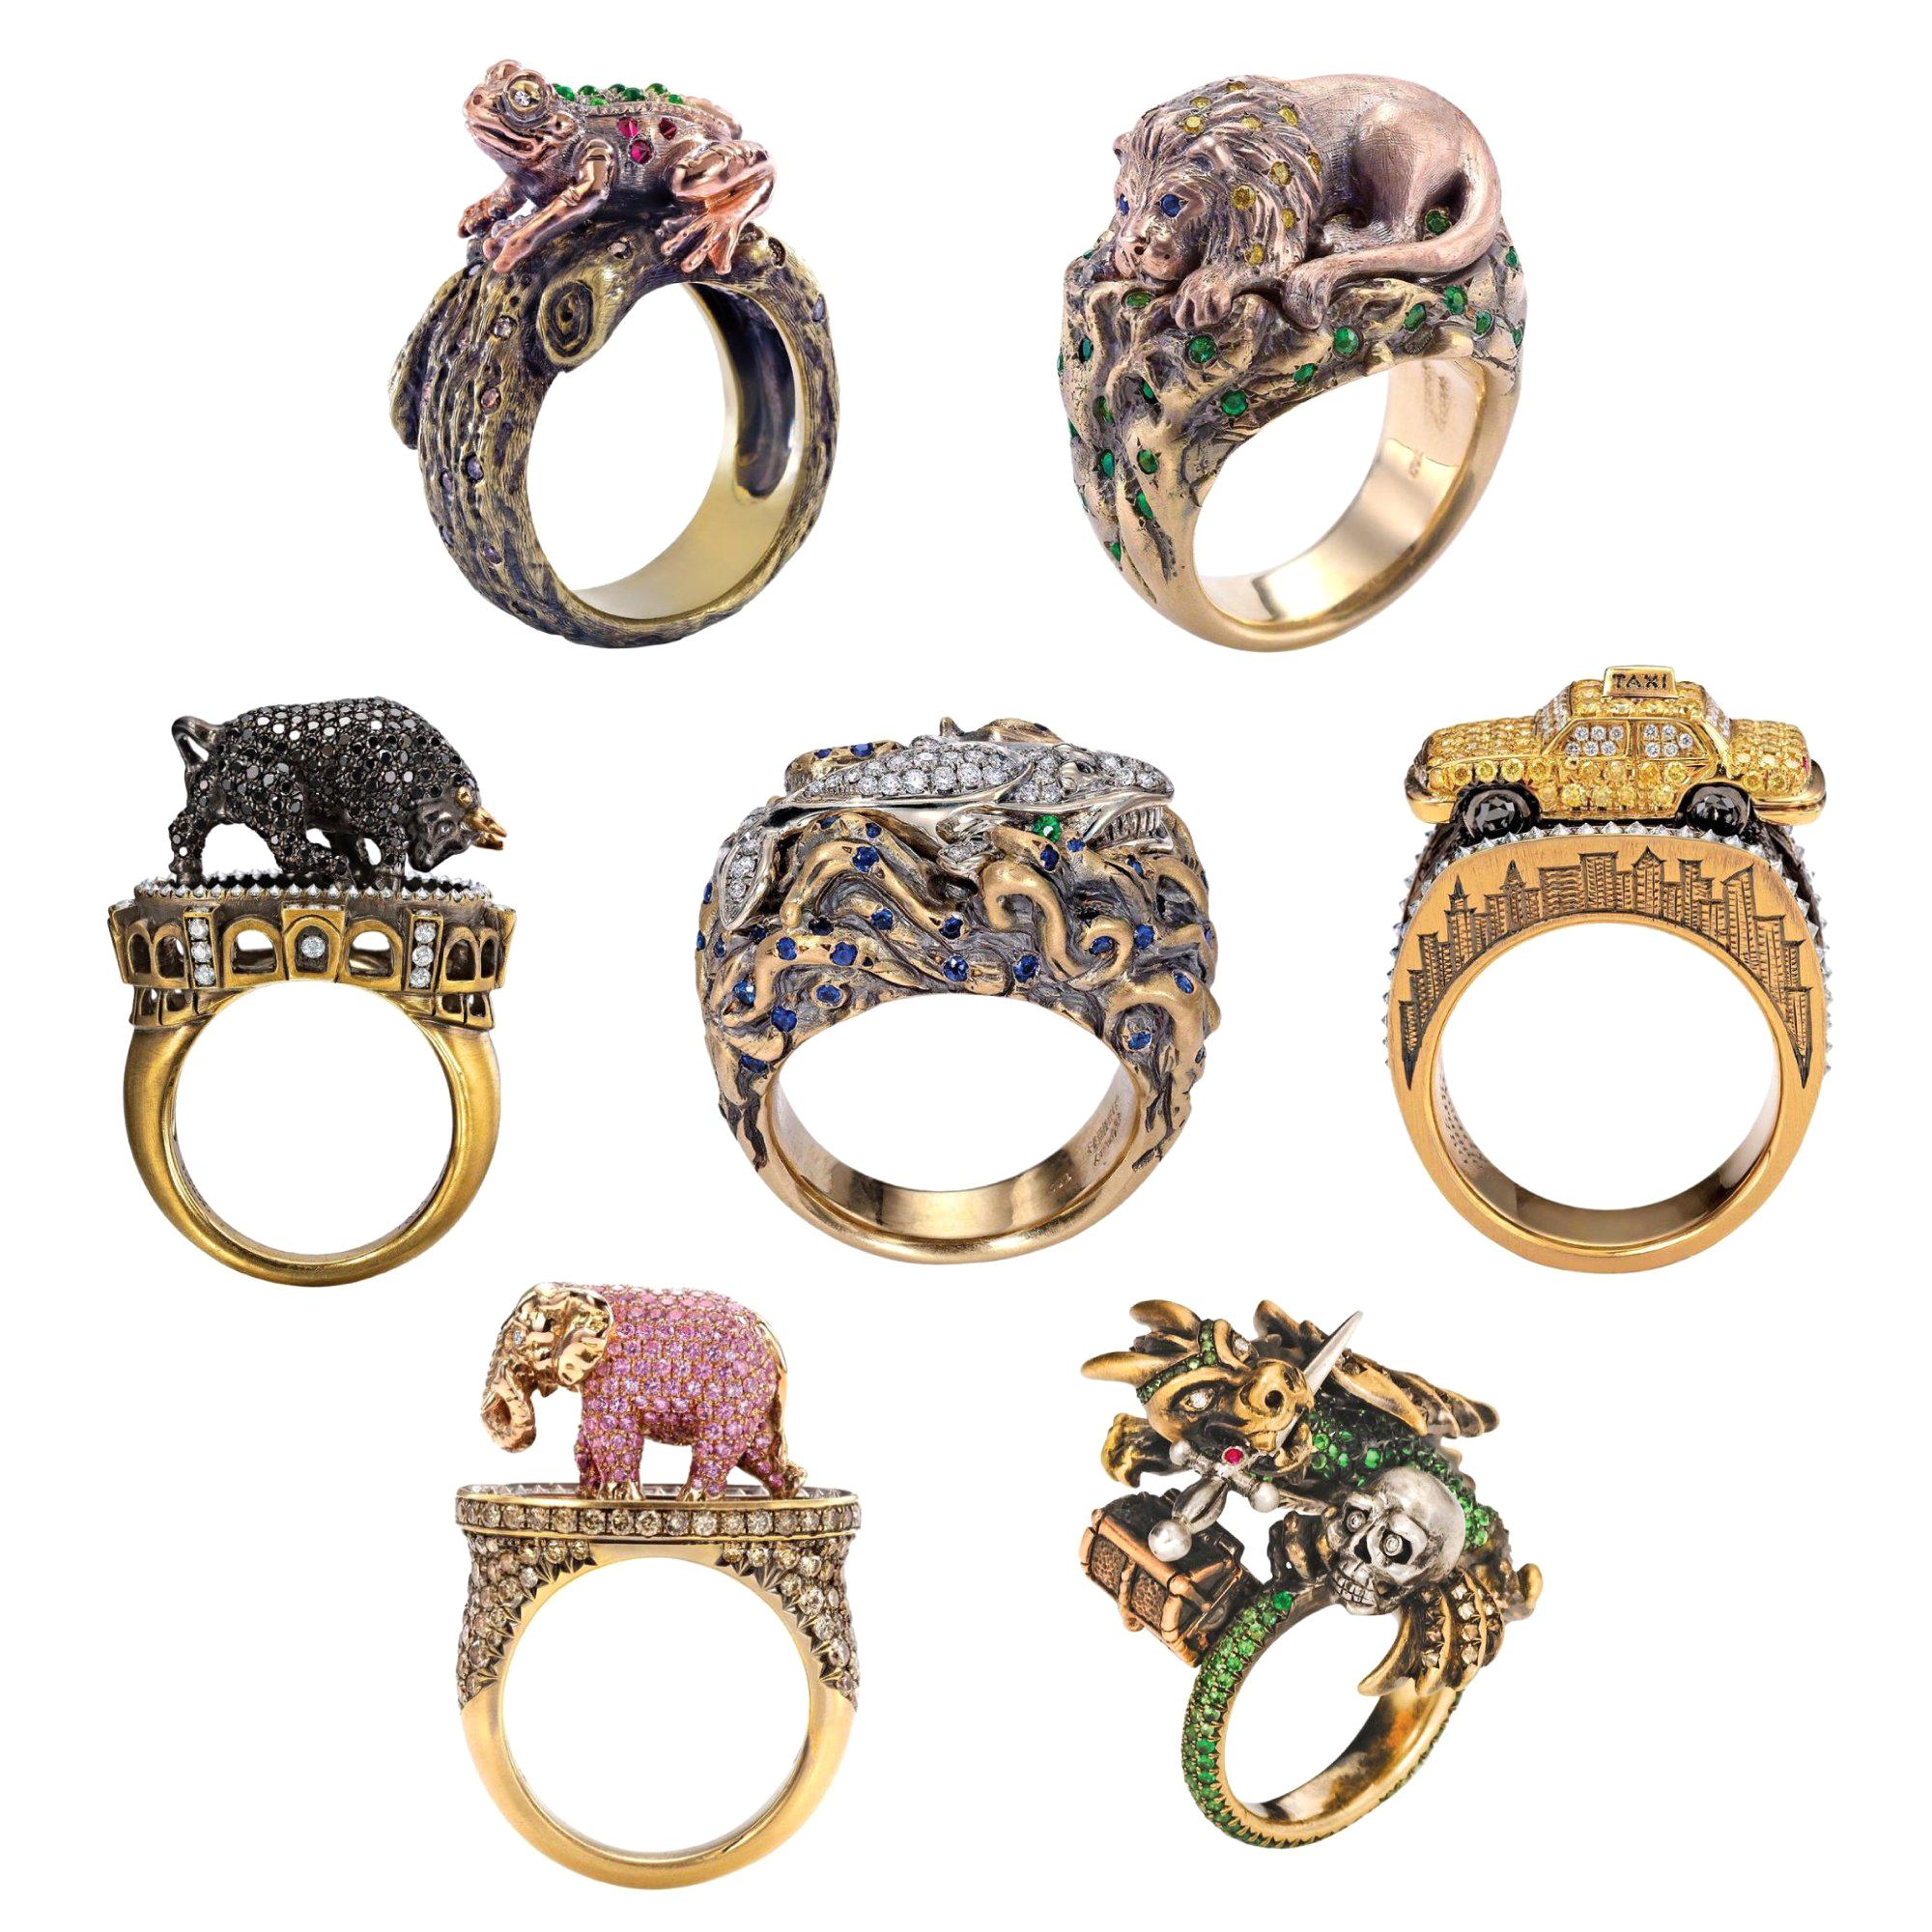 Wendy Brandes 7-Ring Diamond and Colored Gemstone Animal-Design Collection